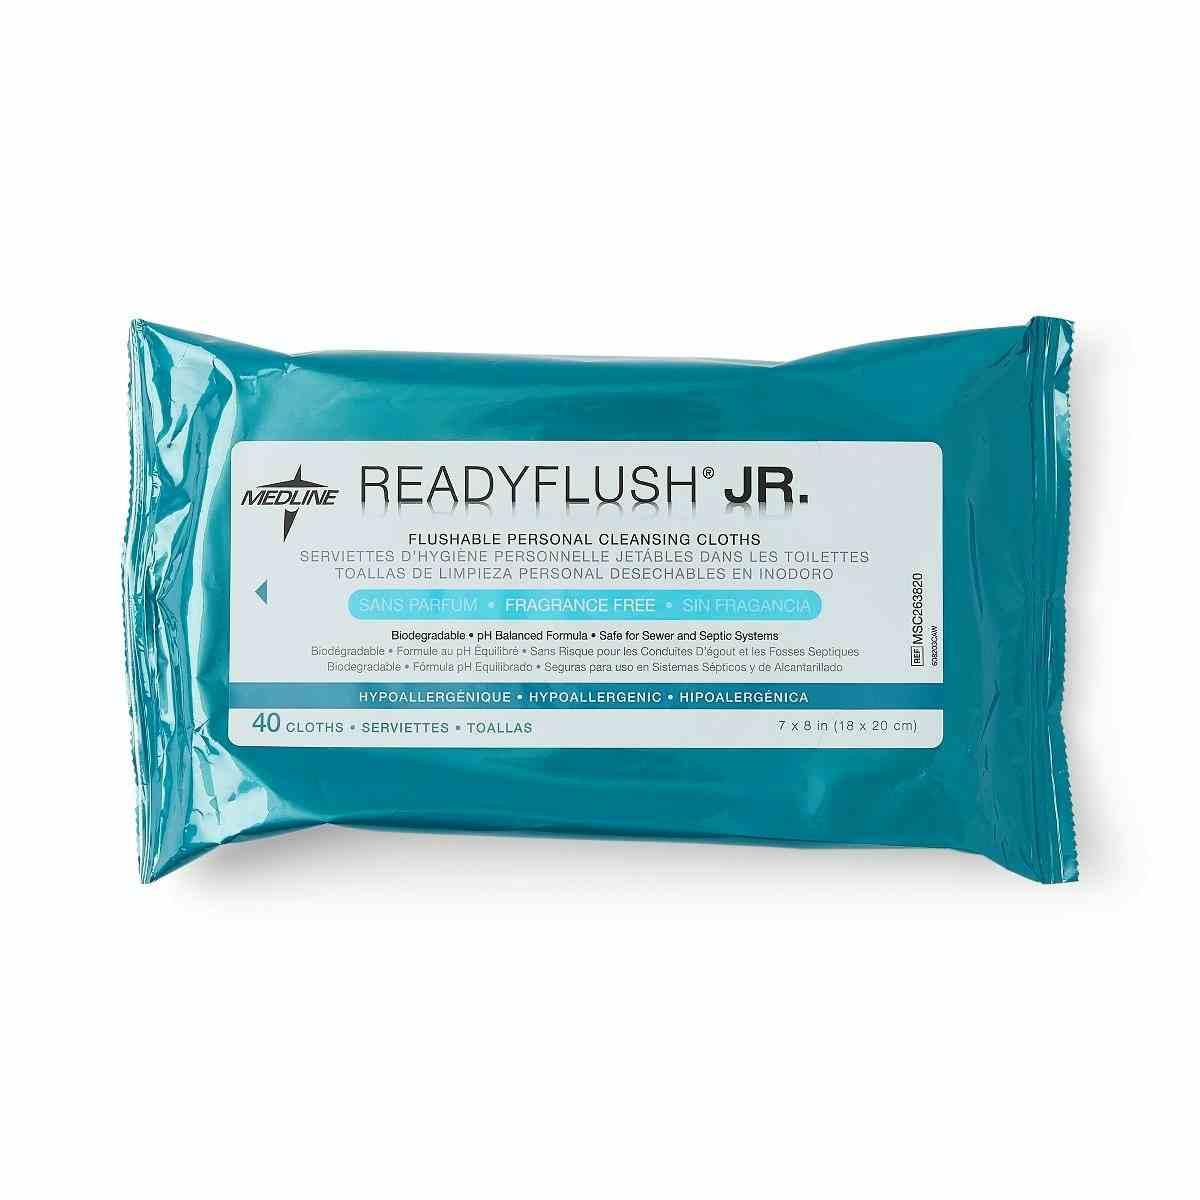 ReadyFlush Jr. Flushable Personal Cleansing Wipes, MSC263820H, Fragrance Free - Pack of 40